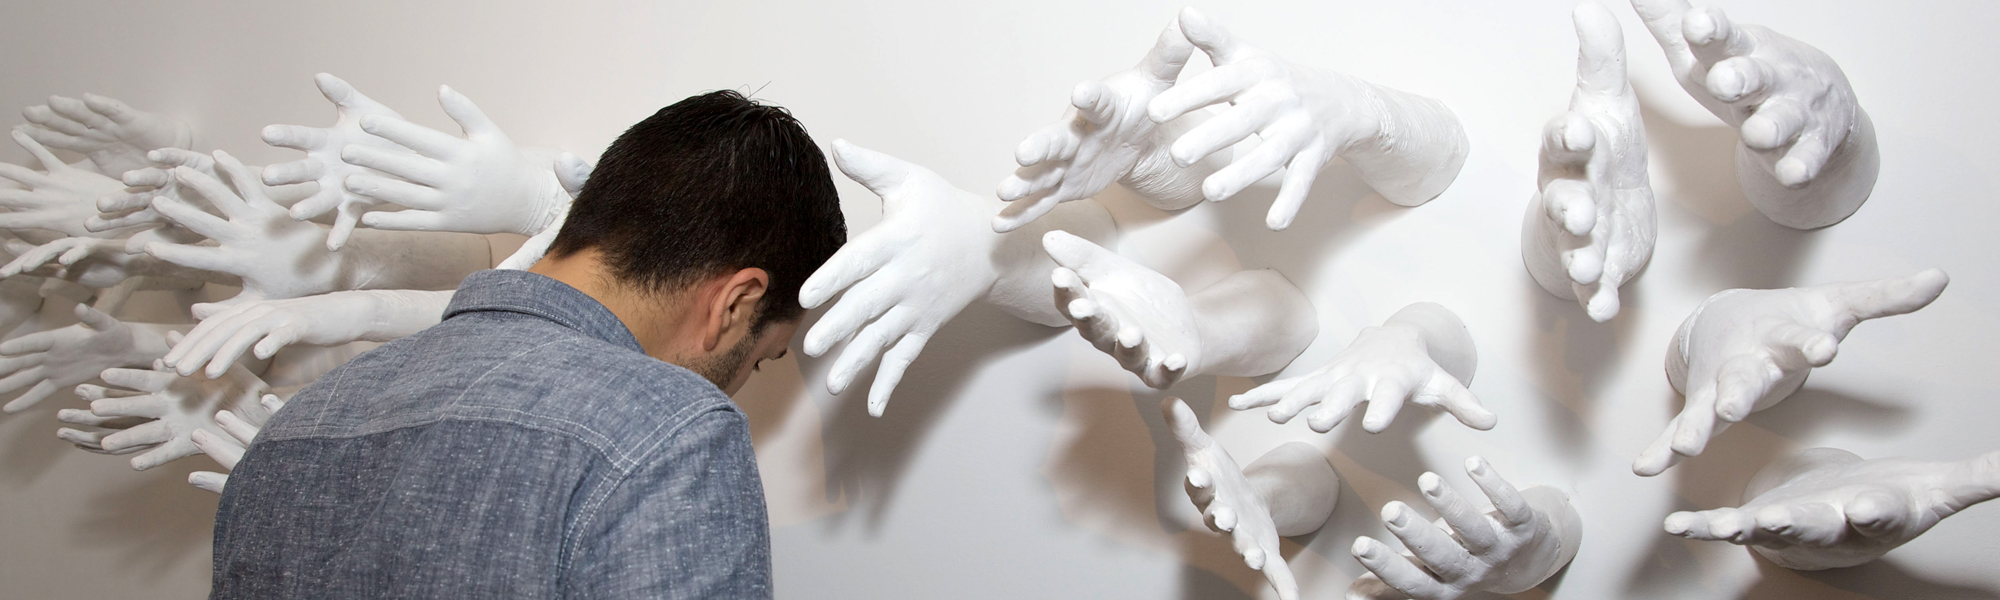 A wall sculpture having many hands and a person leaning towards them